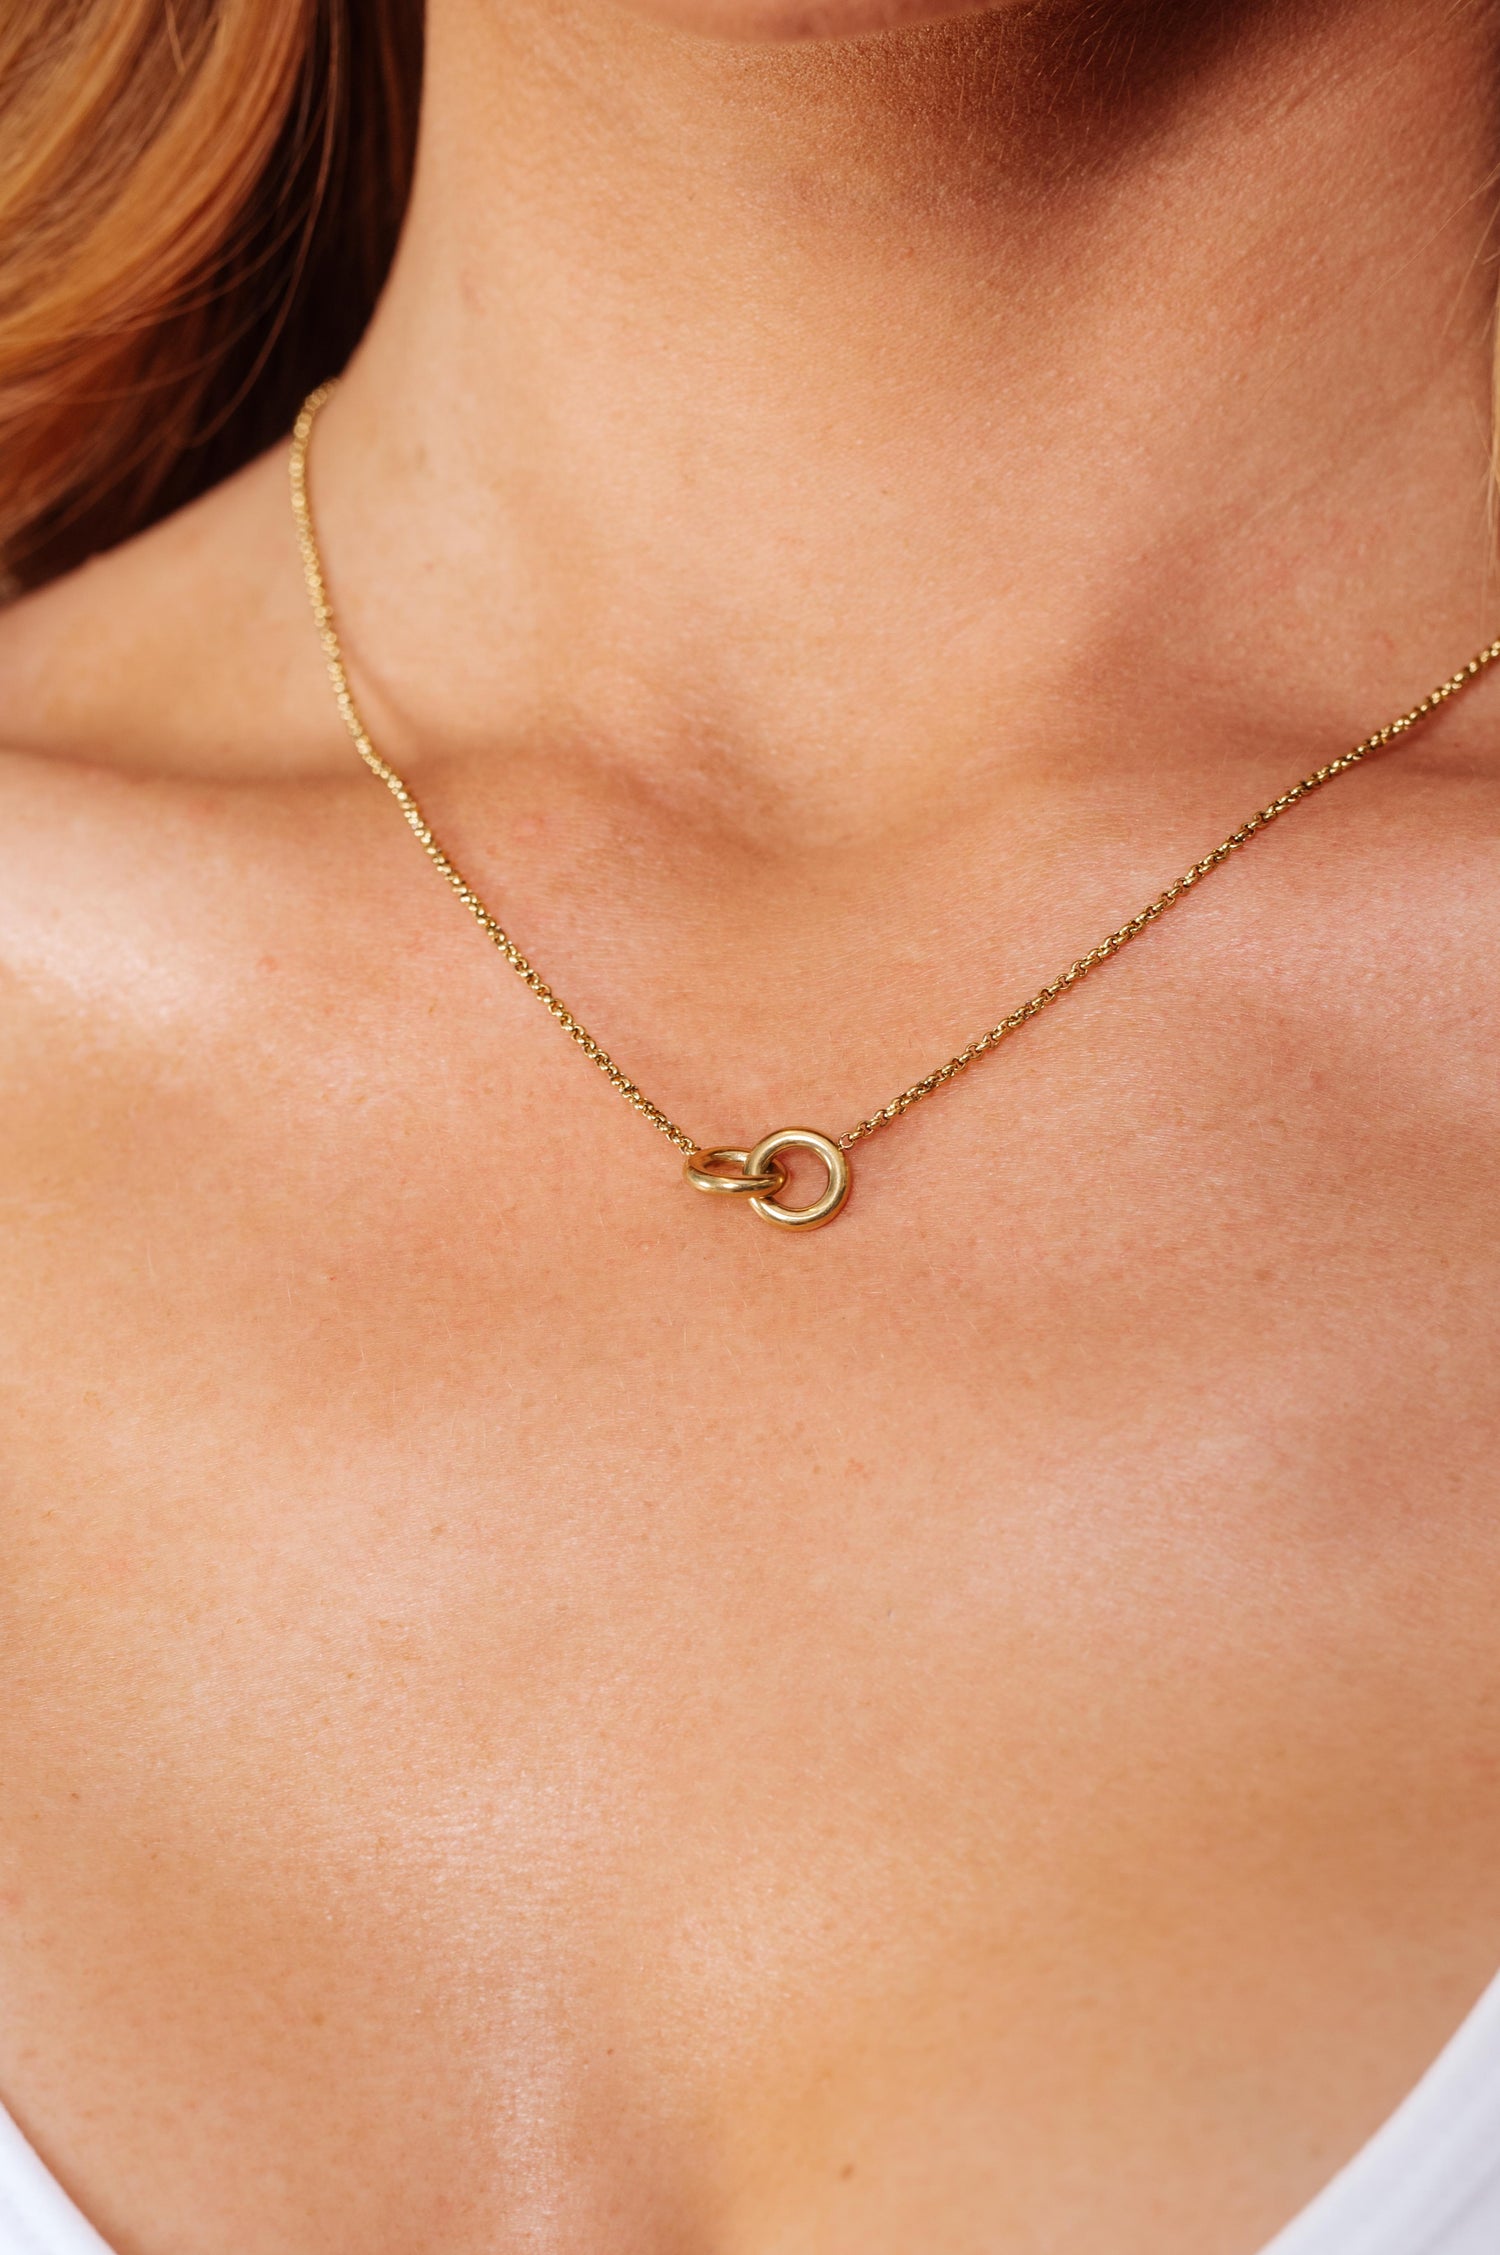 Get twice the style with the Two is Better Than One Necklace! This gold plated necklace comes in a 40cm length with a 2.5" extender for a personalized fit. Made of titanium steel, it features a trendy rope chain and a lobster clasp. Upgrade your accessory game and stand out in the crowd!&nbsp;